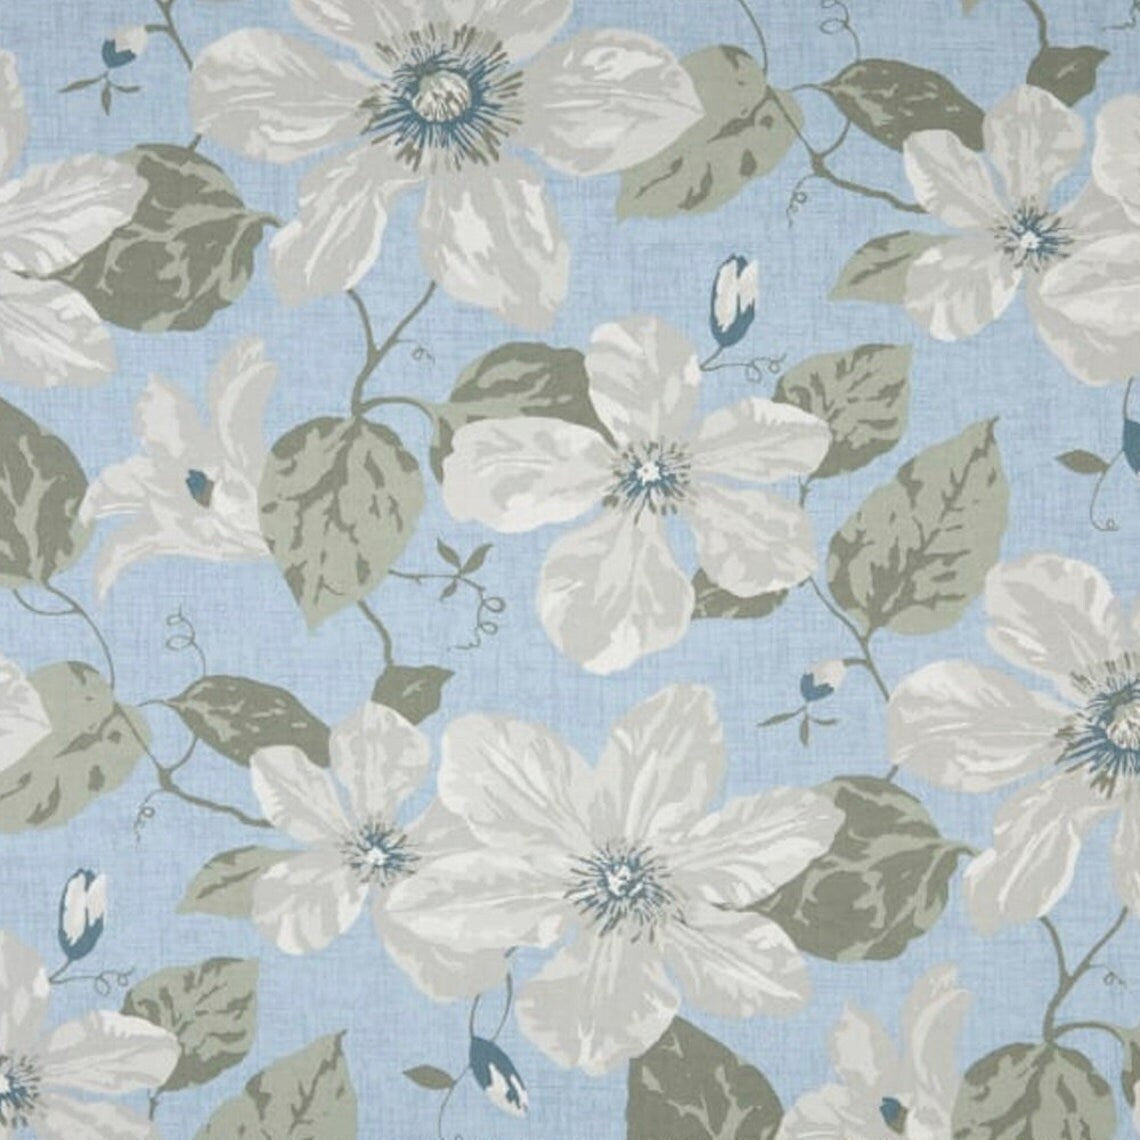 pinch pleated curtains in nelly antique blue floral, large scale